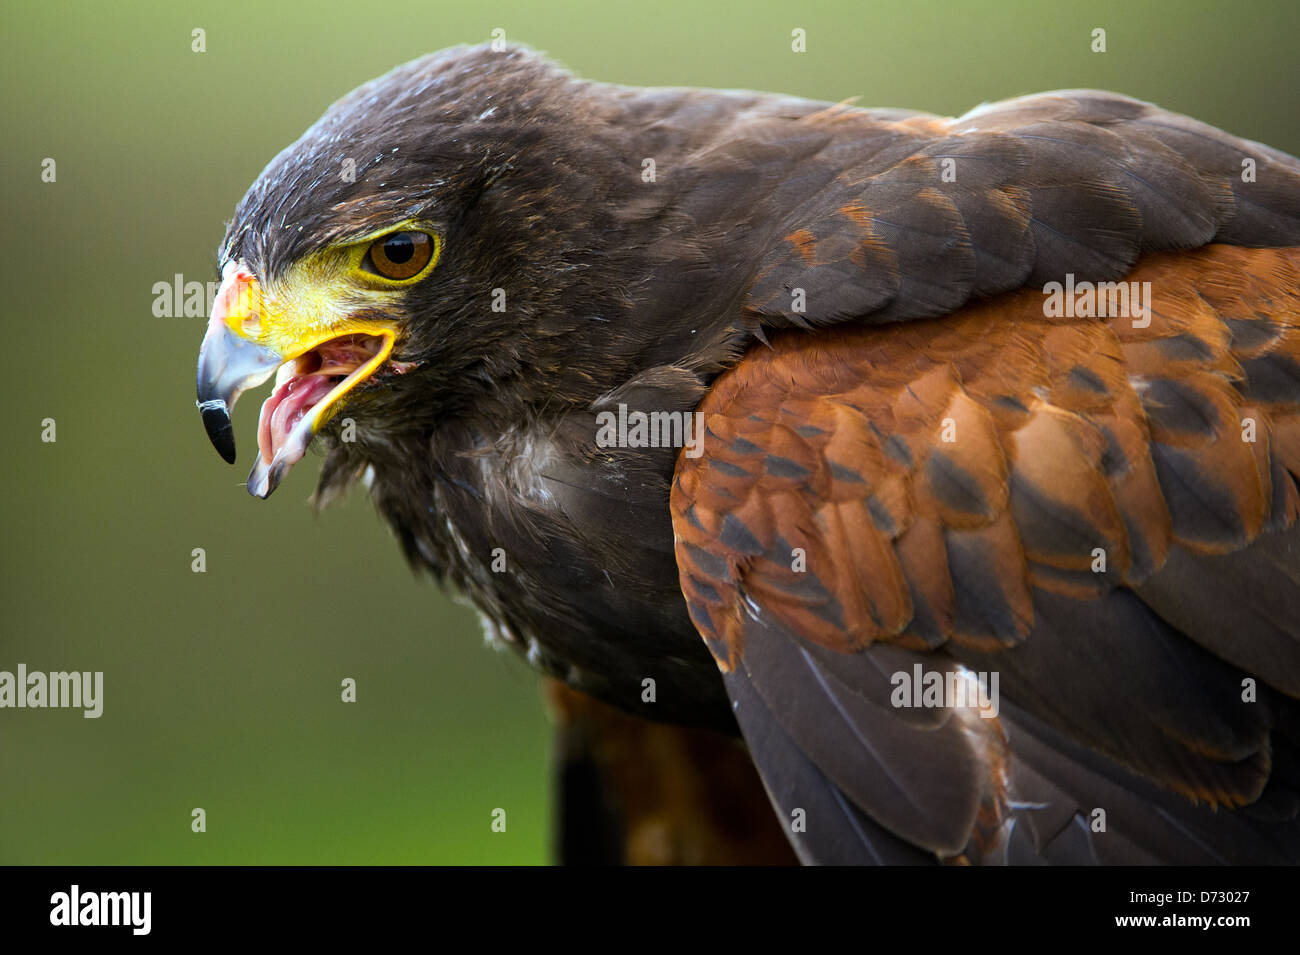 harris hawk close up against a blurred green background Stock Photo